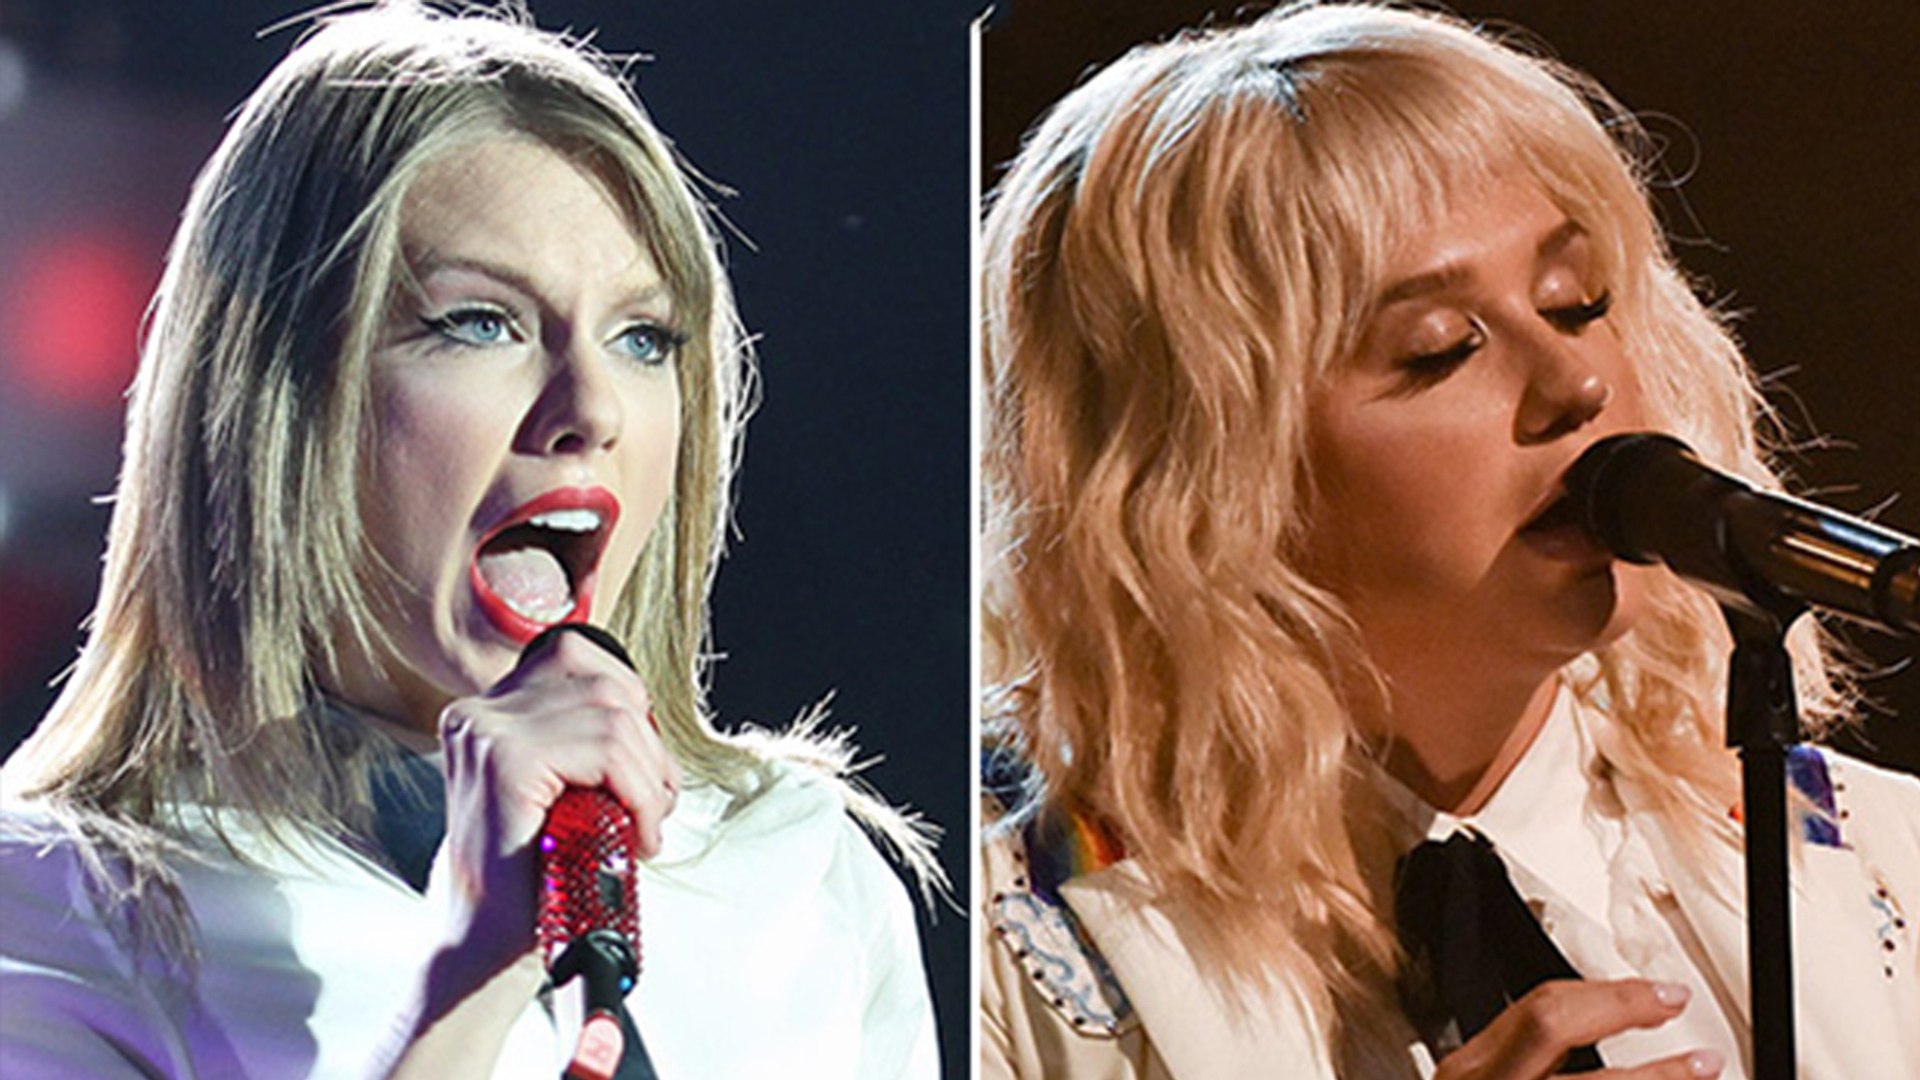 Taylor Swift and Kesha Teases New Song Collaboration